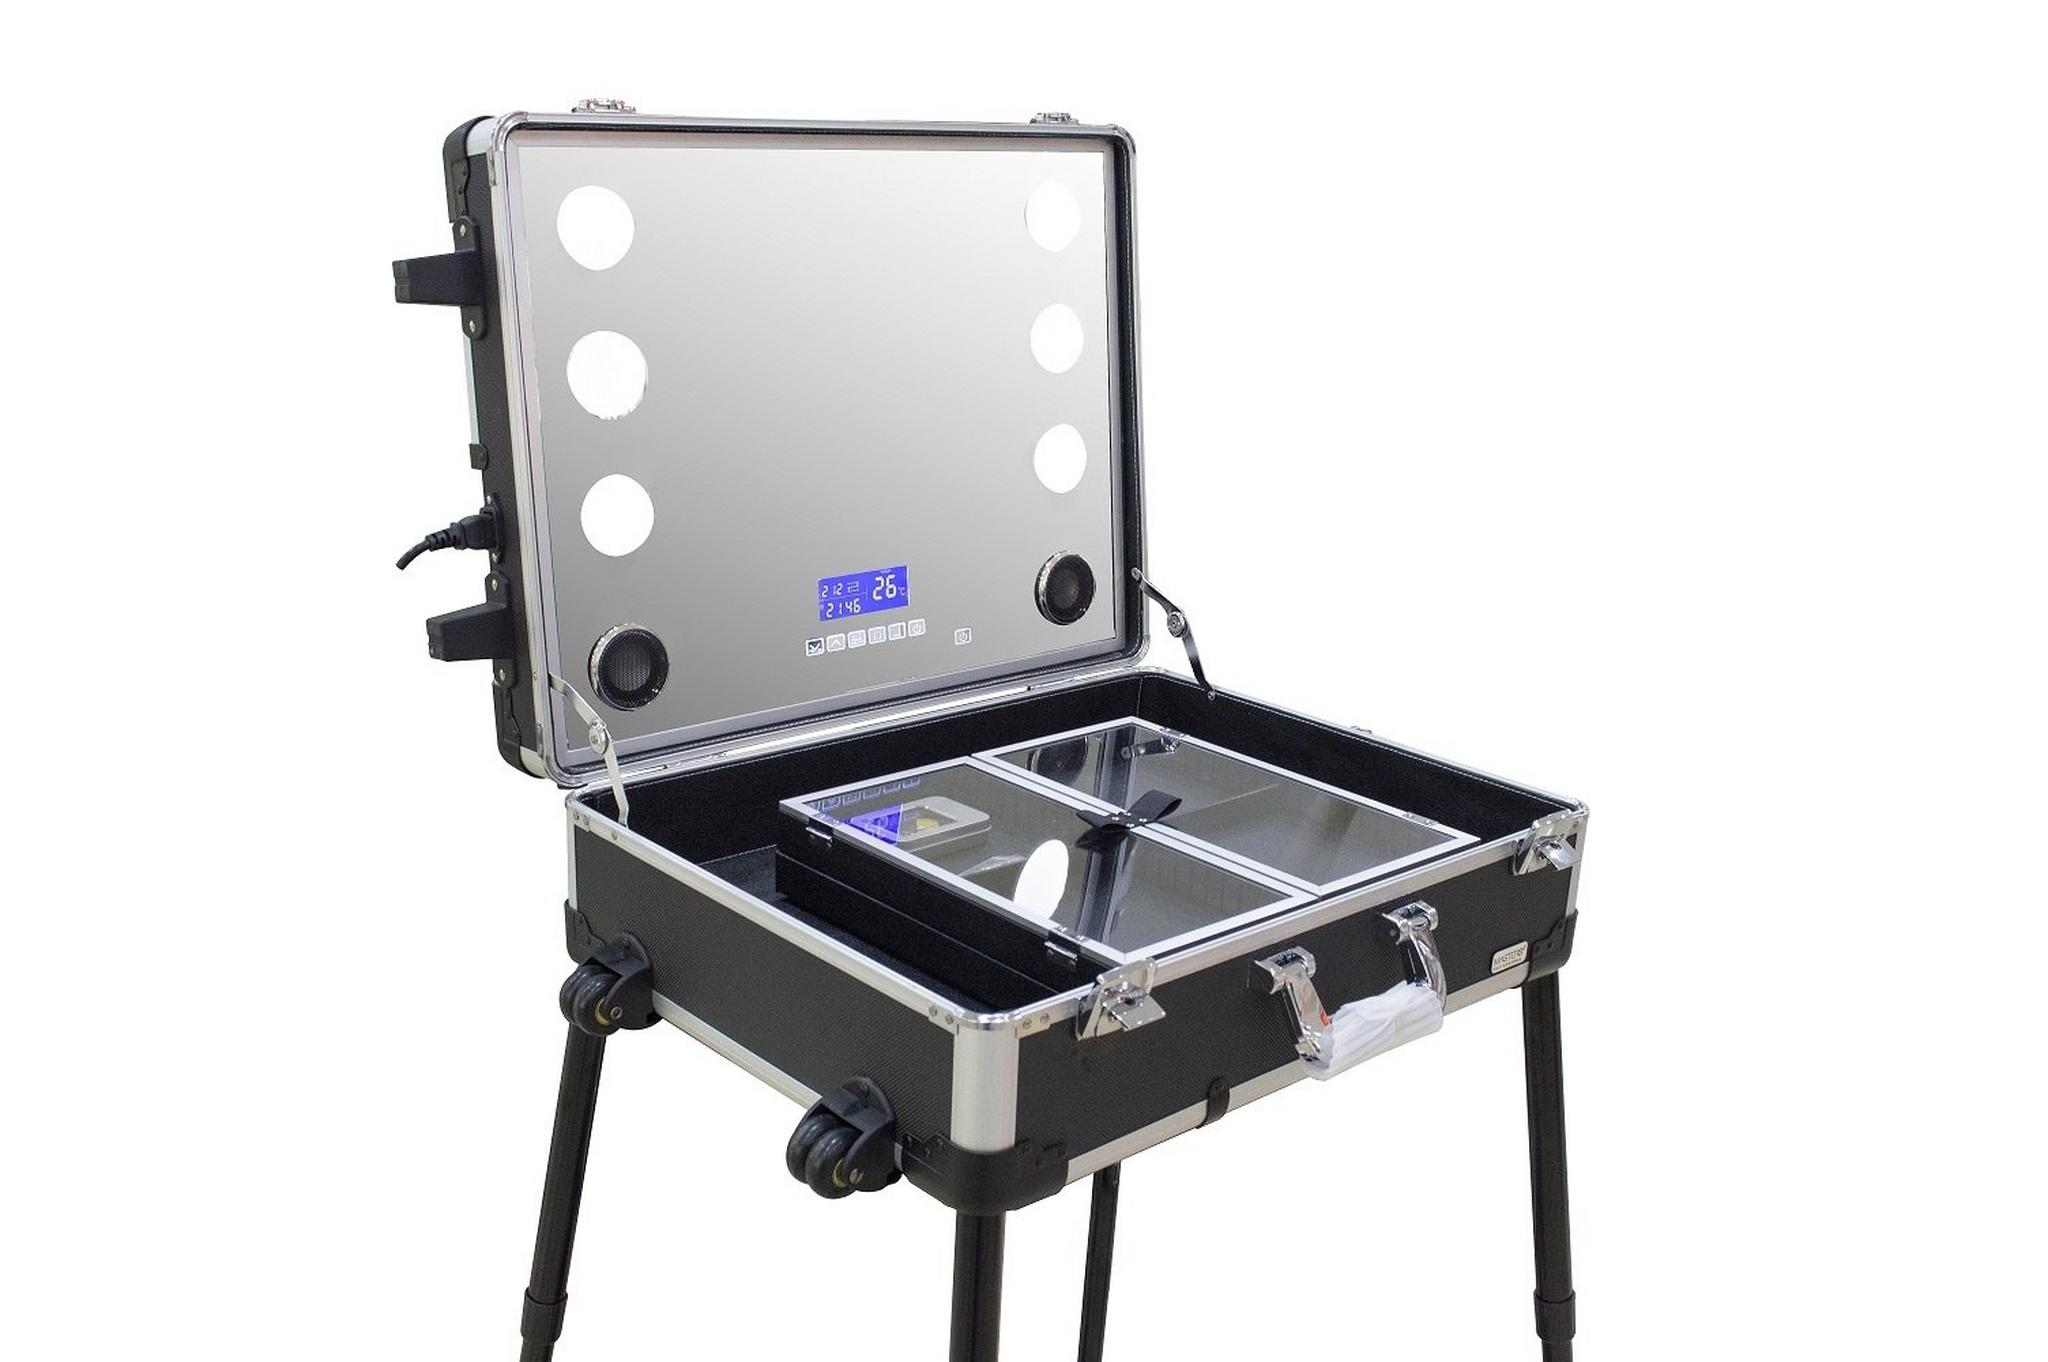 Masters Profession Make-Up Portable Station Black With Trolley Option (PB7080)